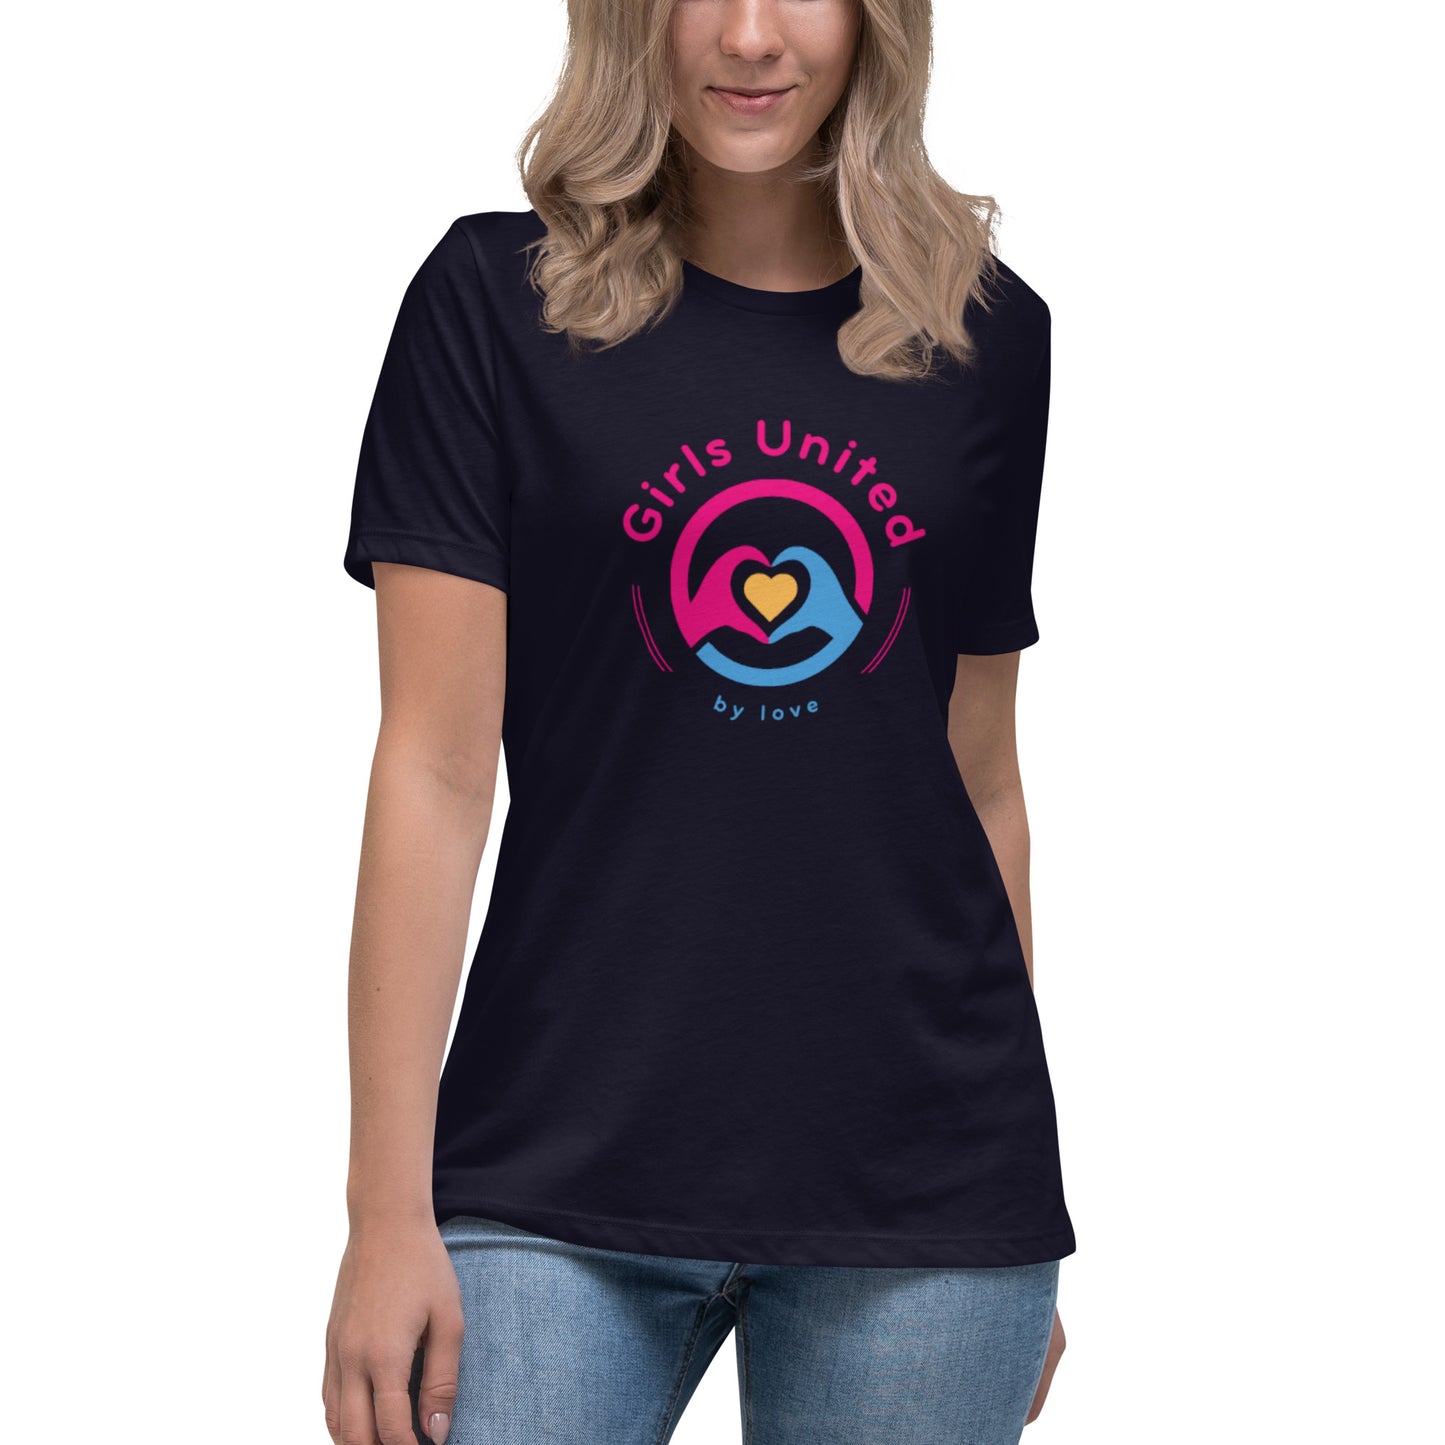 Girls United By Love Women's Relaxed T-Shirt